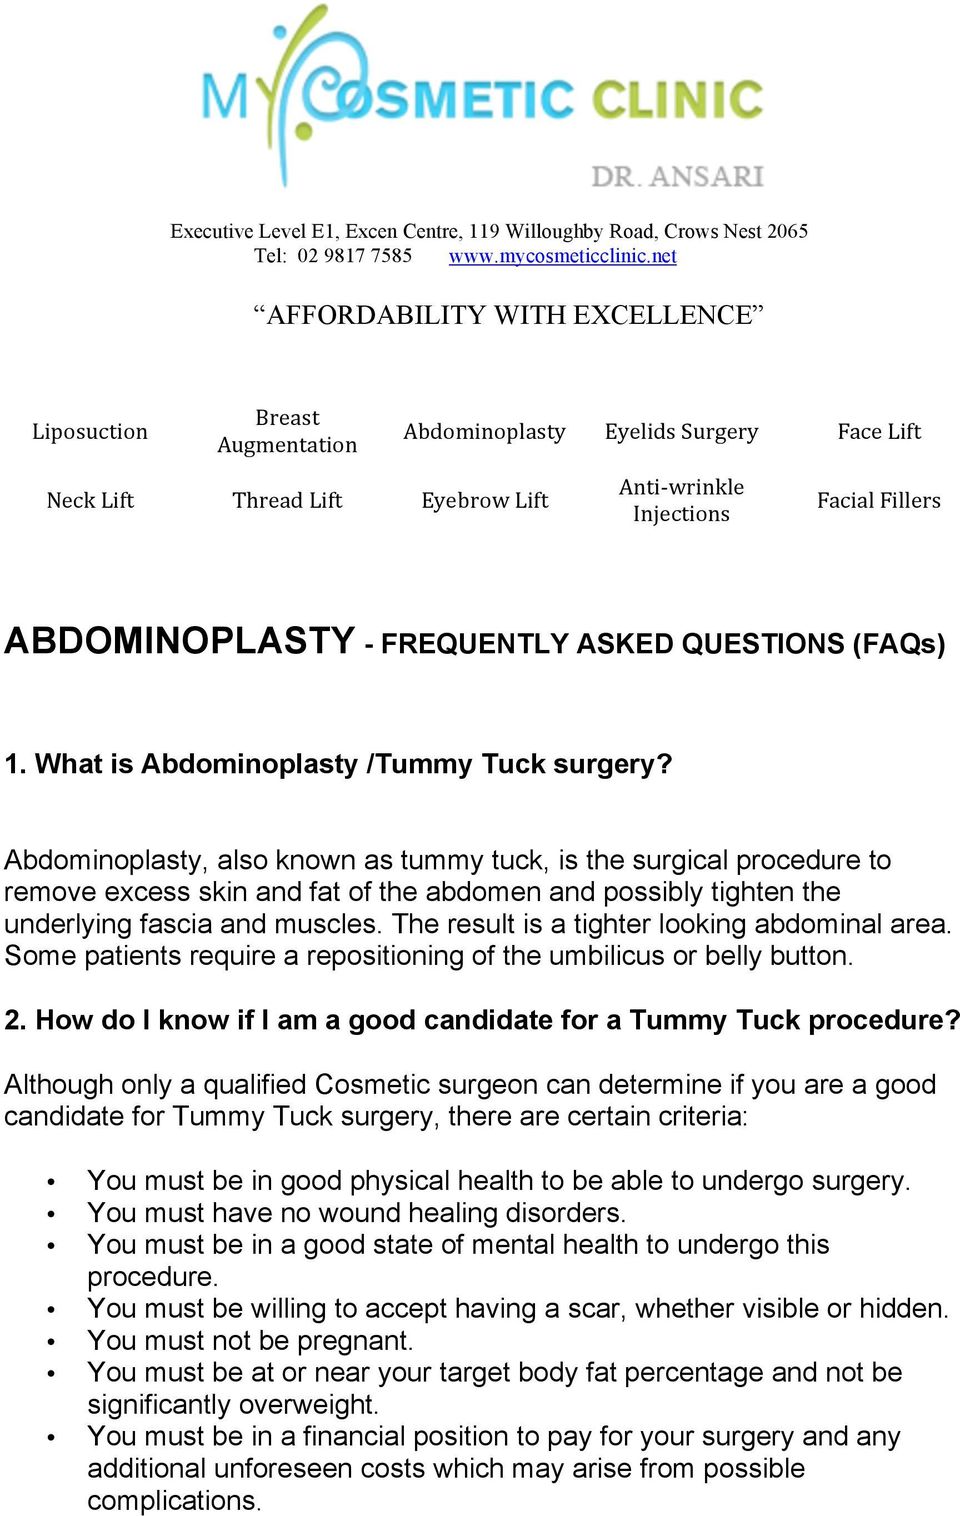 FREQUENTLY ASKED QUESTIONS (FAQs) 1. What is Abdominoplasty /Tummy Tuck surgery?